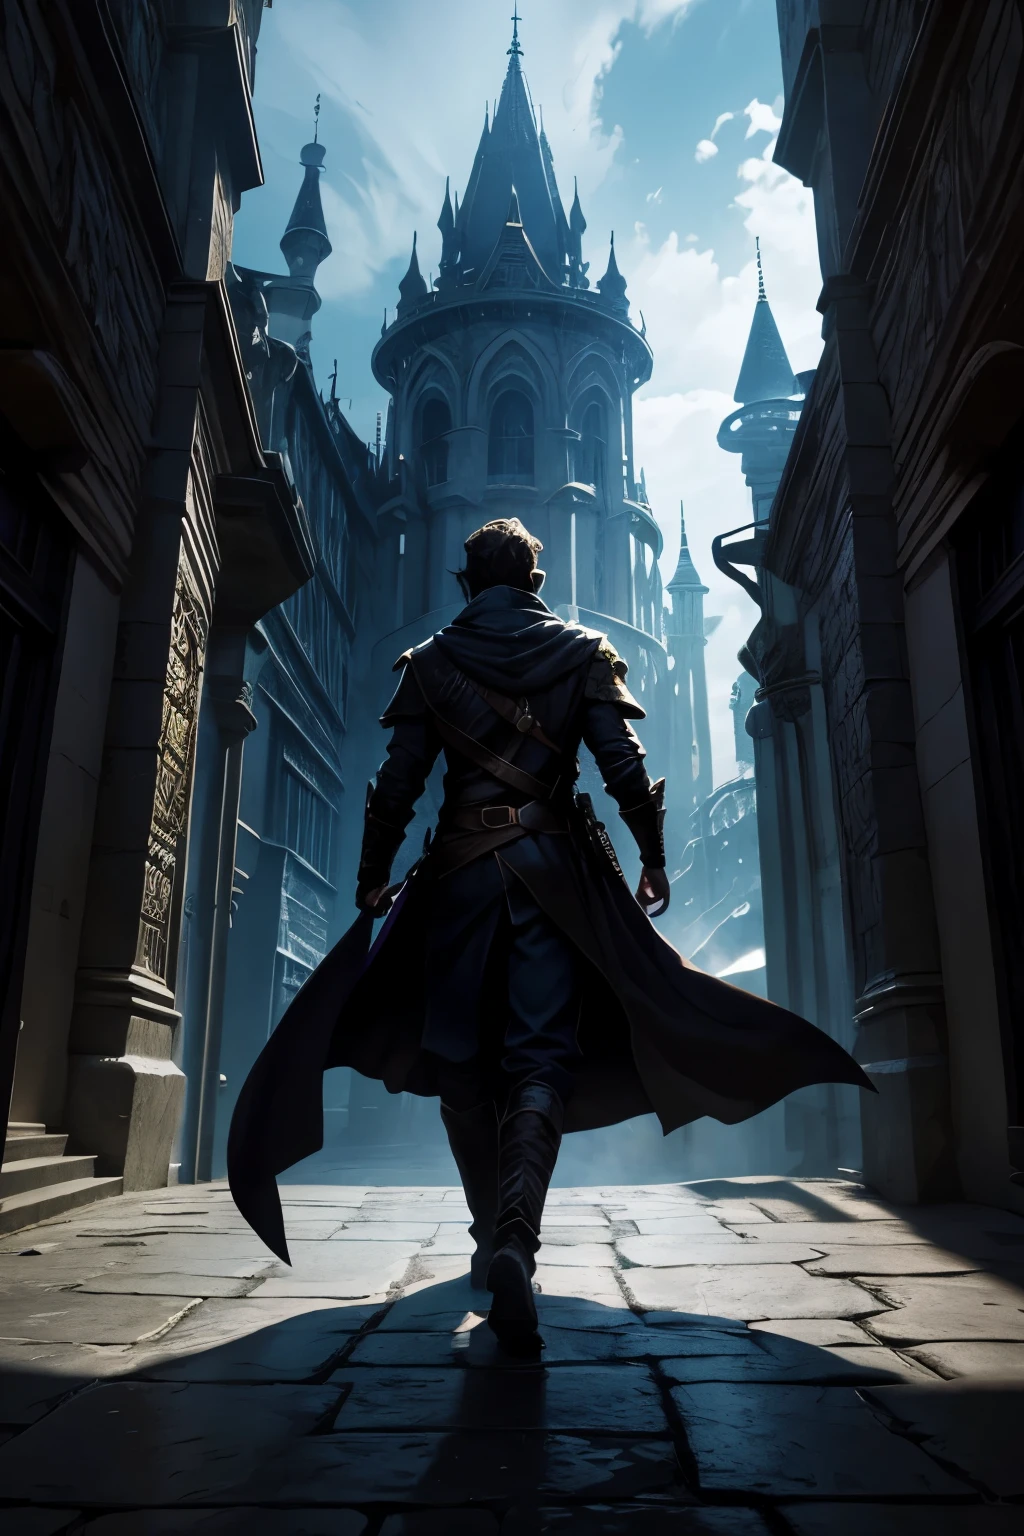 "Create a fantasy book cover for 'The Chronicles of Cole Winterbourne: Shadow's Embrace,' featuring a mysterious protagonist amidst a magical world of shadows and intrigue."